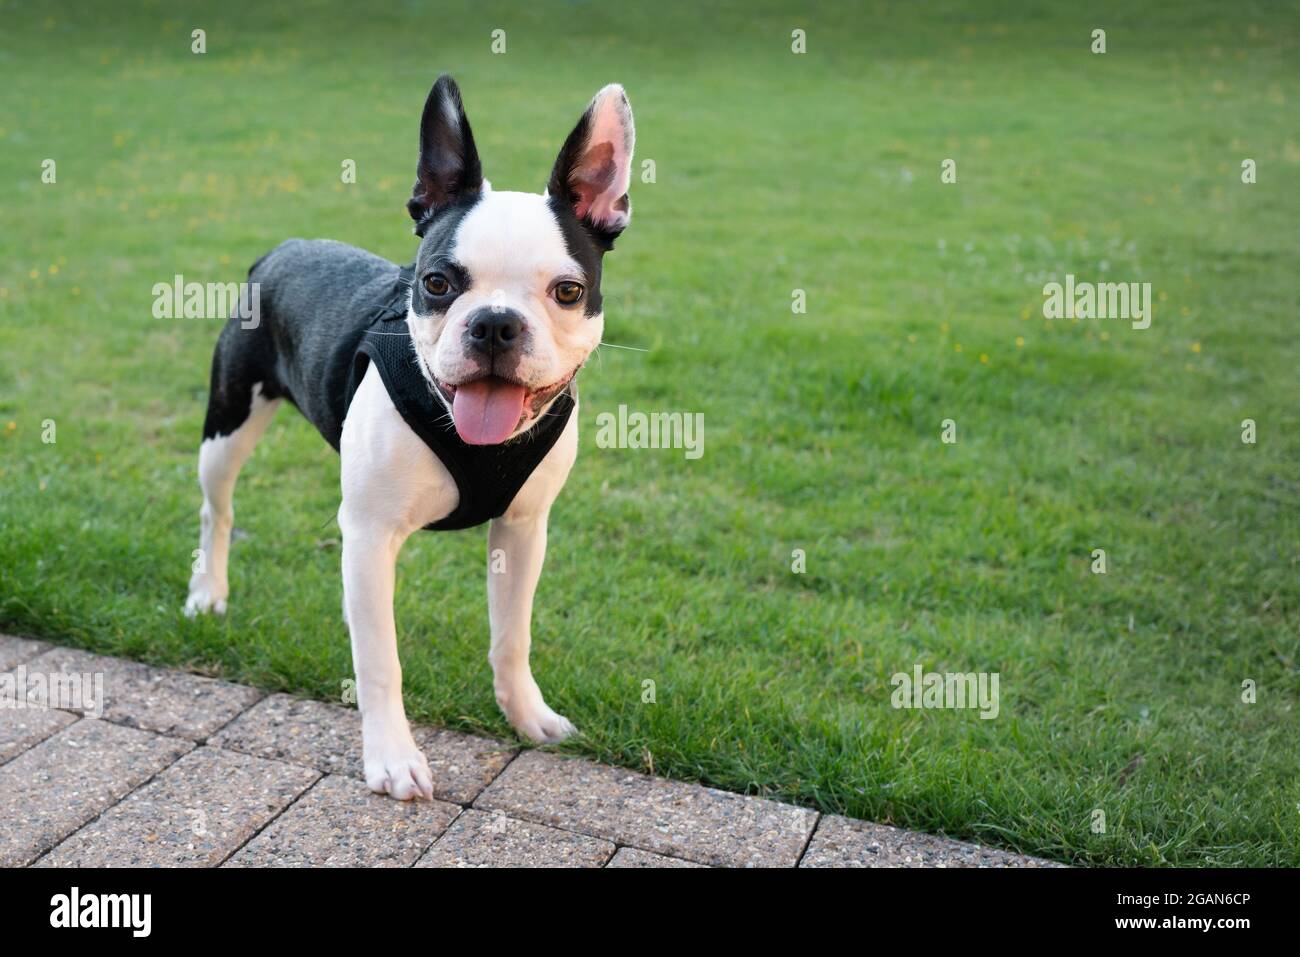 Cute Boston Terrier puppy standing outside smiling. She has her tounge out. She is wearing a harness.There is copyspace. Stock Photo